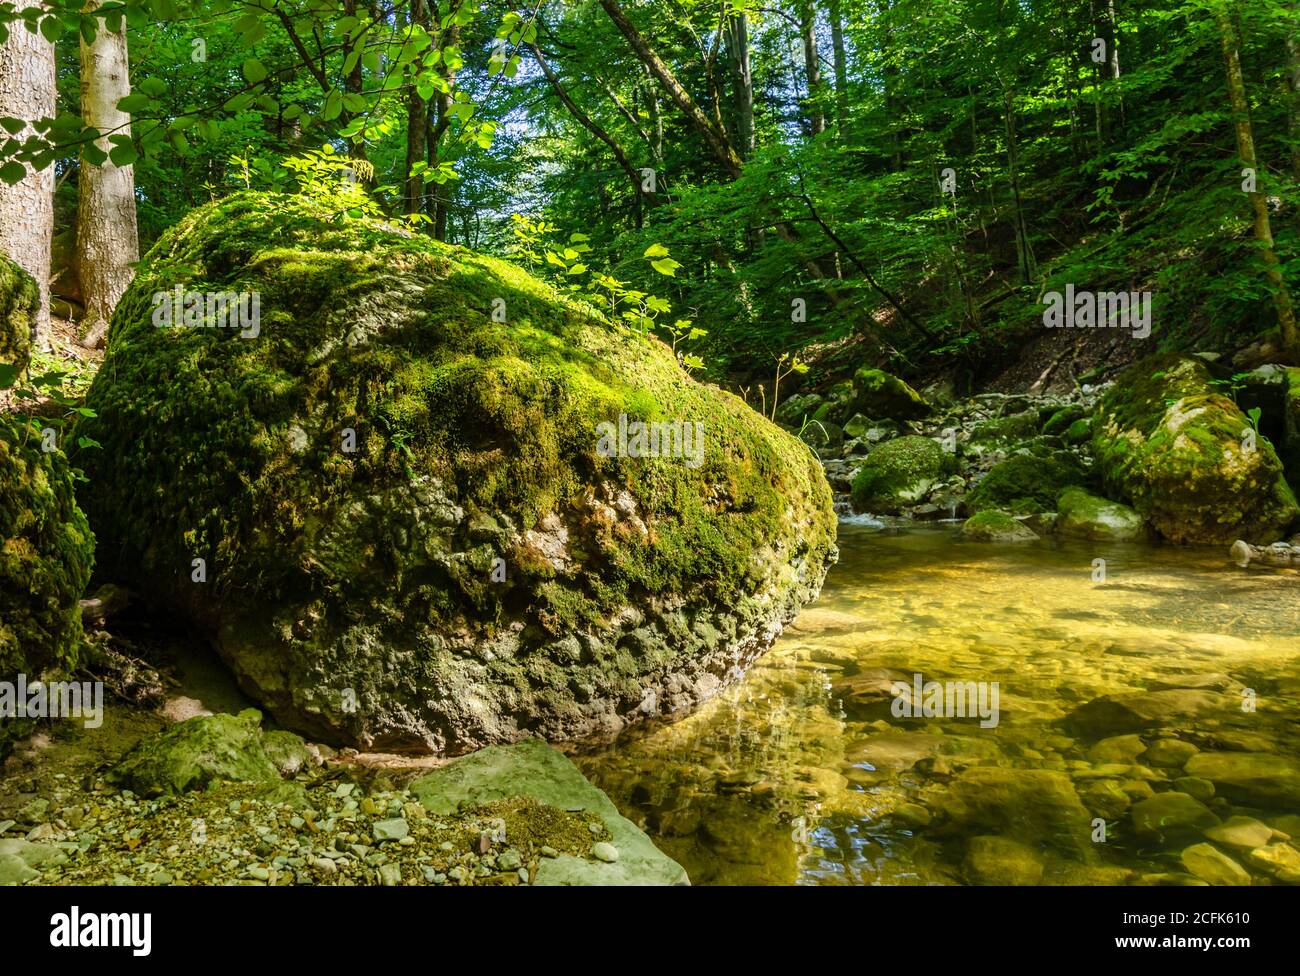 Big rock in the sunlight, overgrown with green moss, at the the creek of a natural forest. Big stone at the edge of a stream bed on a sunny summer day Stock Photo